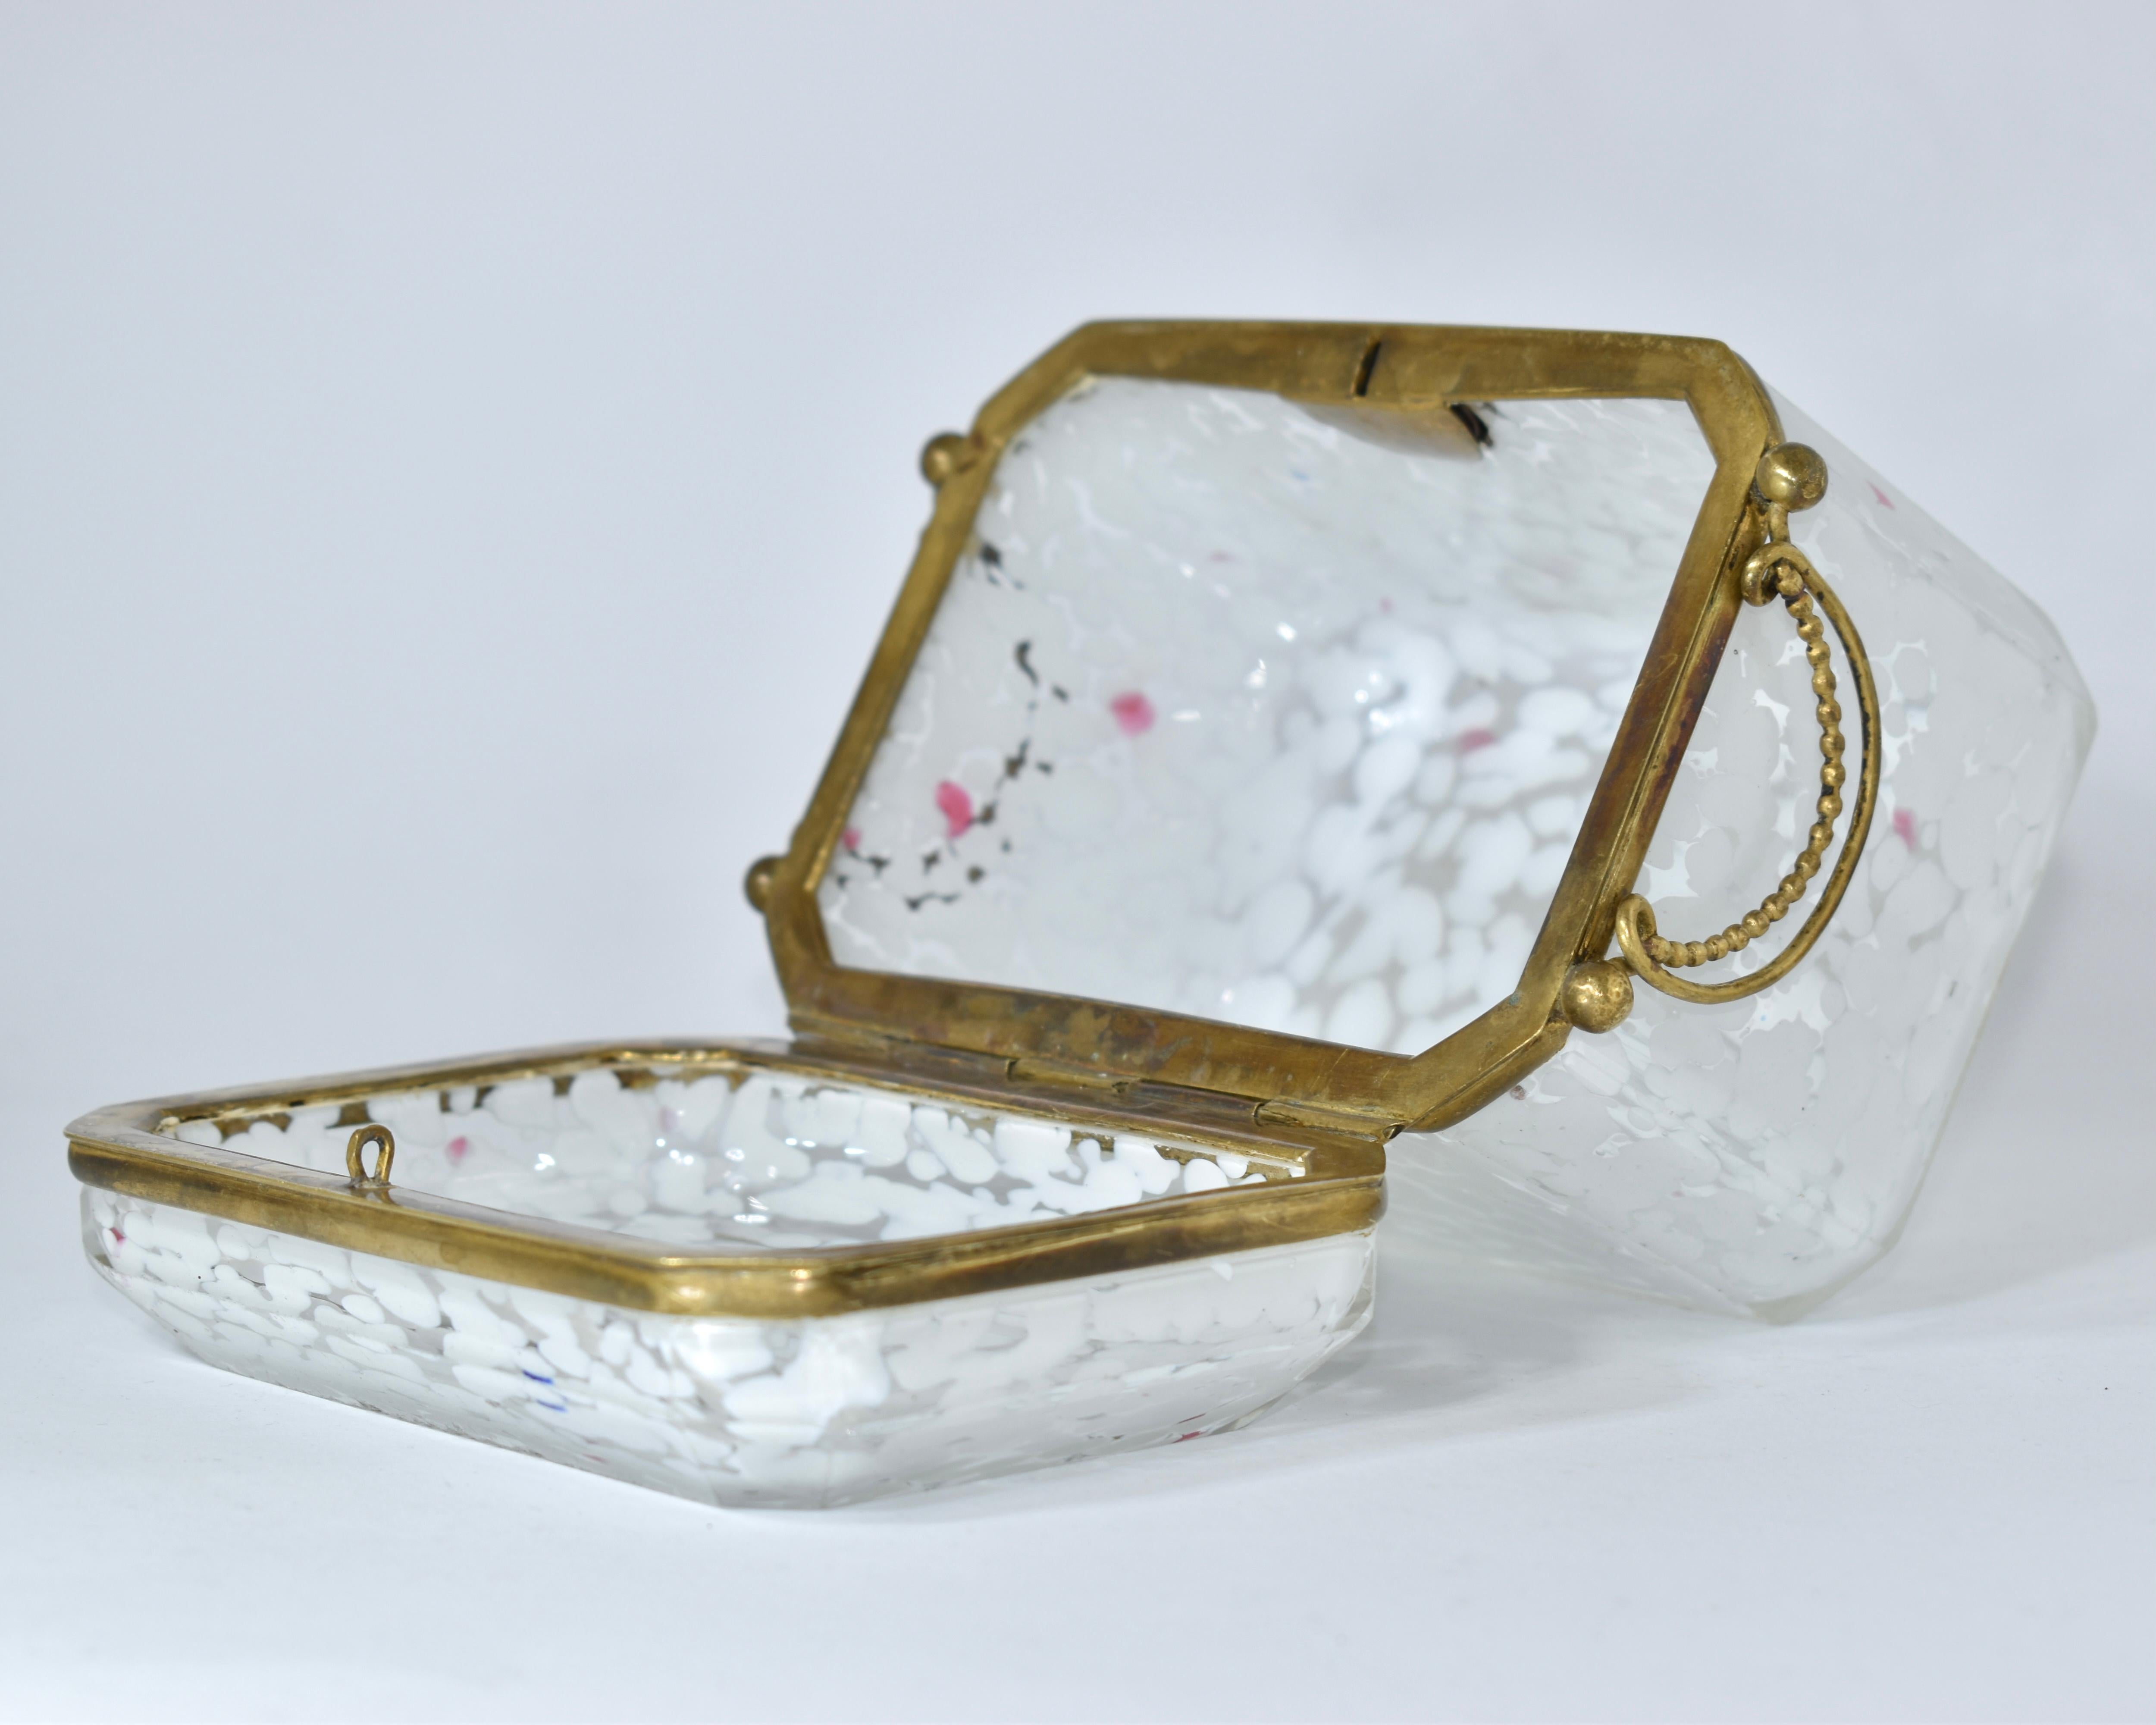 Antique Bohemian Glass Jewelry Box, 19th Century In Good Condition For Sale In Rostock, MV